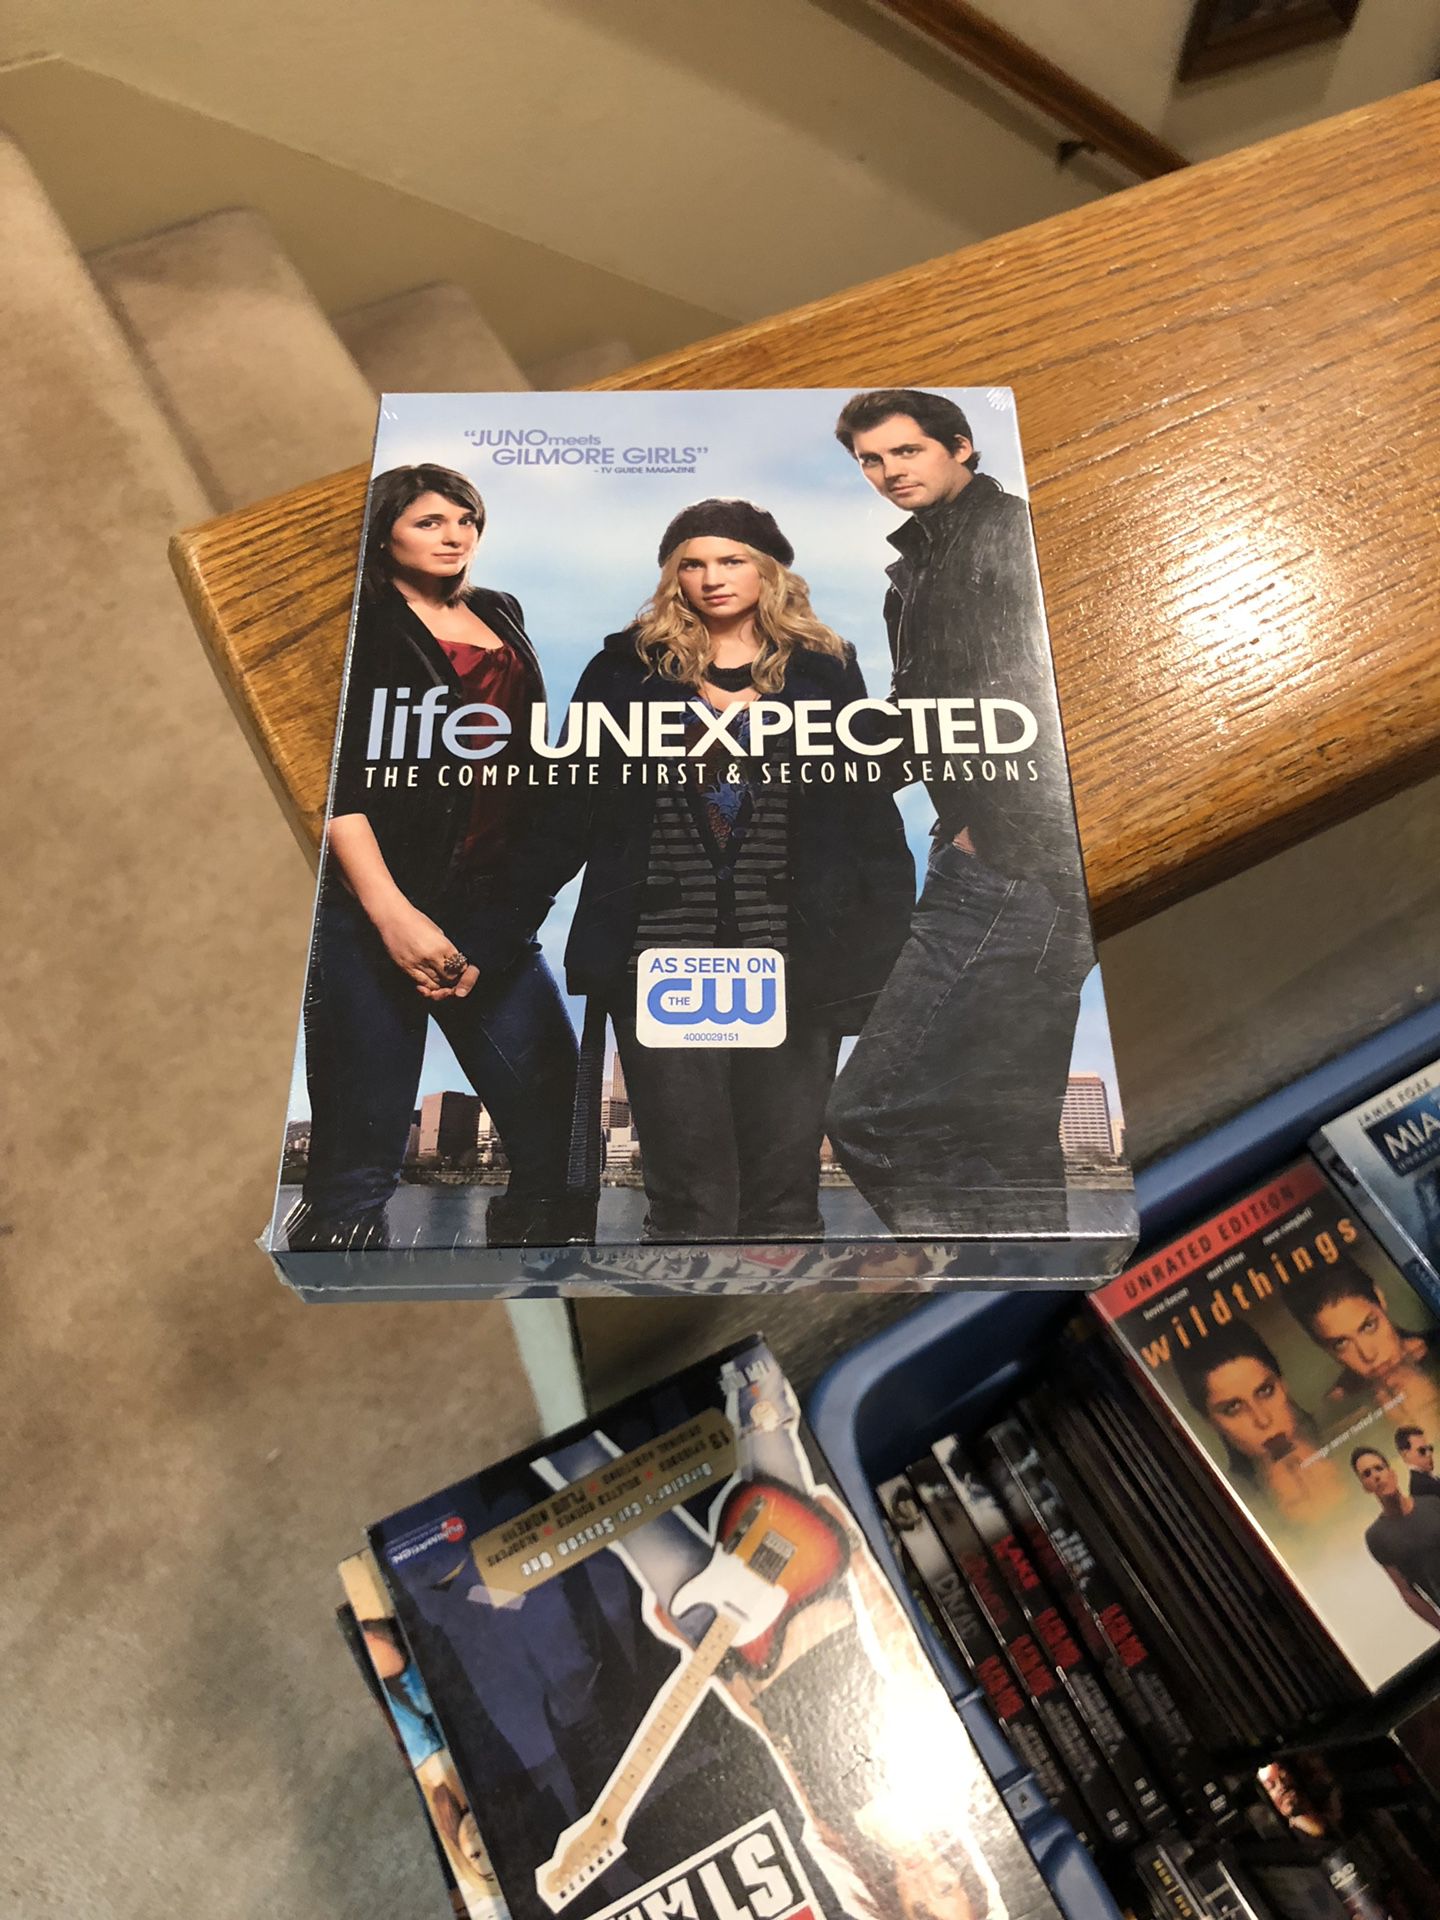 Life Unexpected The Complete First And Second Seasons DVD Brand New Factory Sealed tv series 1 2 one two the cw rare oop discontinued